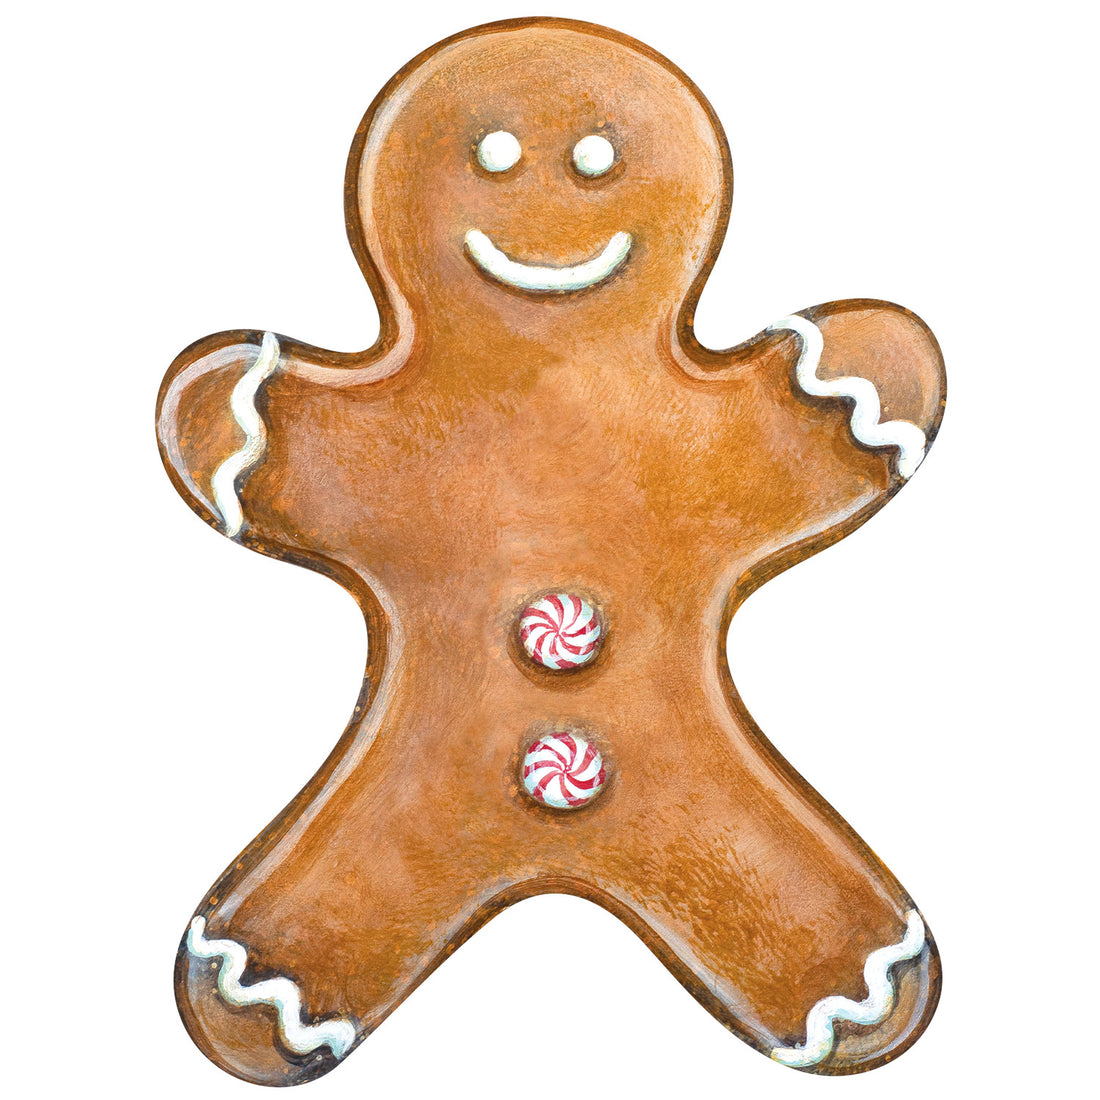 A die-cut illustrated classic gingerbread man in toasty brown with white icing details and peppermint swirl buttons. 